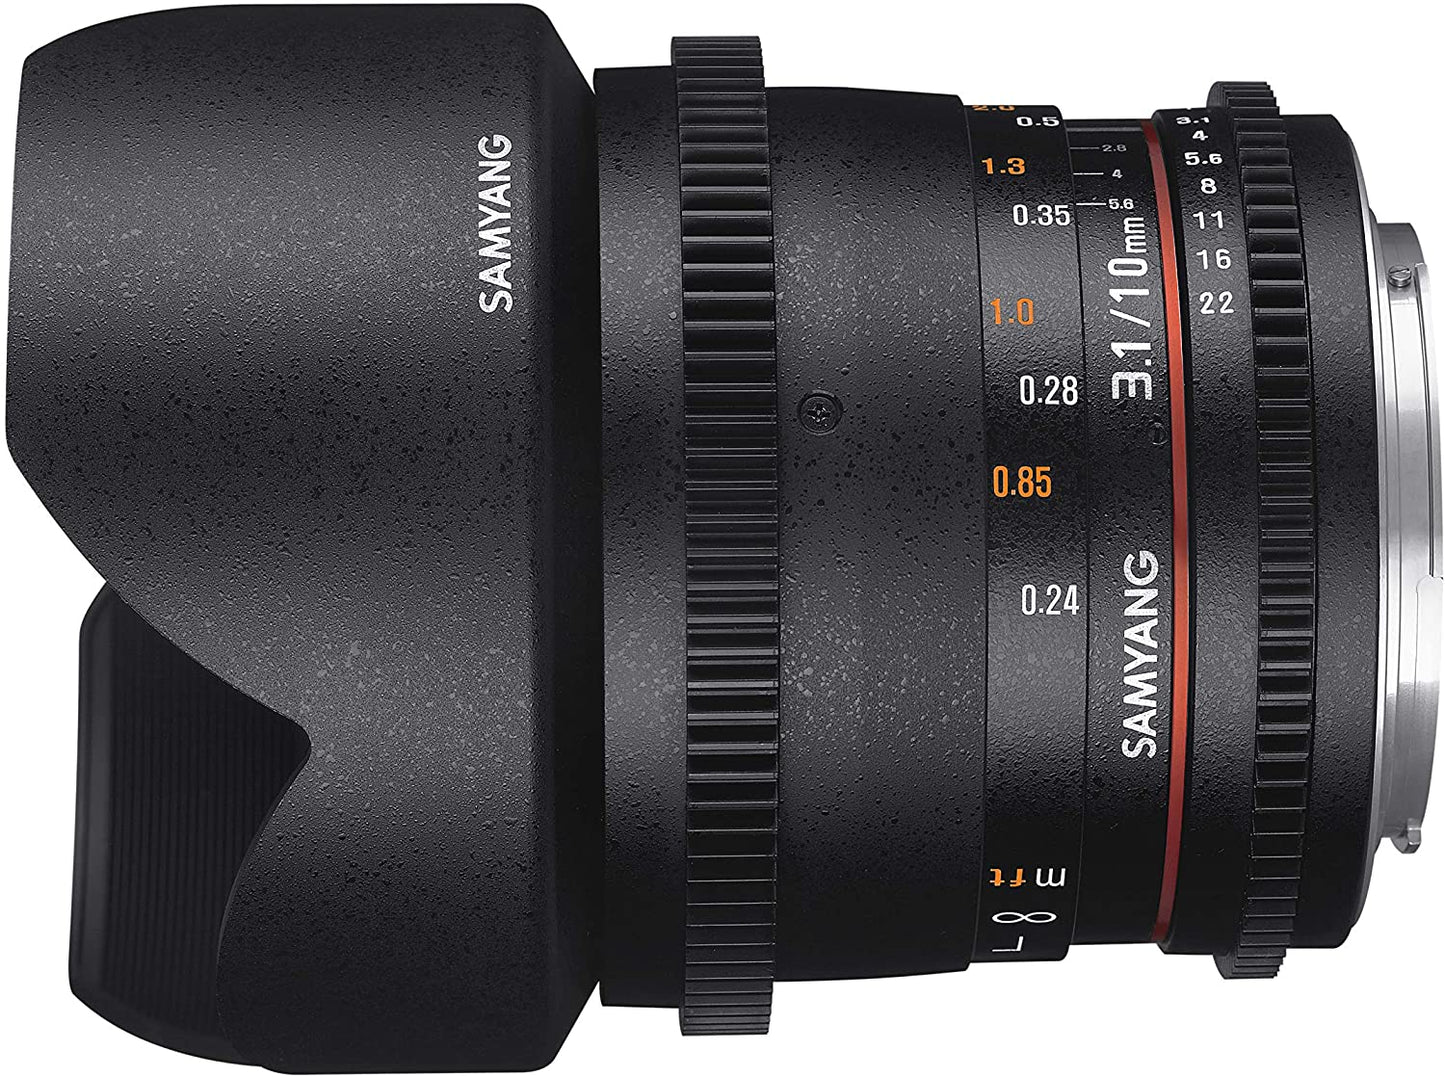 Samyang 10mm T3.1 Wide Angle Manual Focus Cine Lens (E-Mount) for Sony Mirrorless Cameras for Professional Cinema Videography and Filmmaking